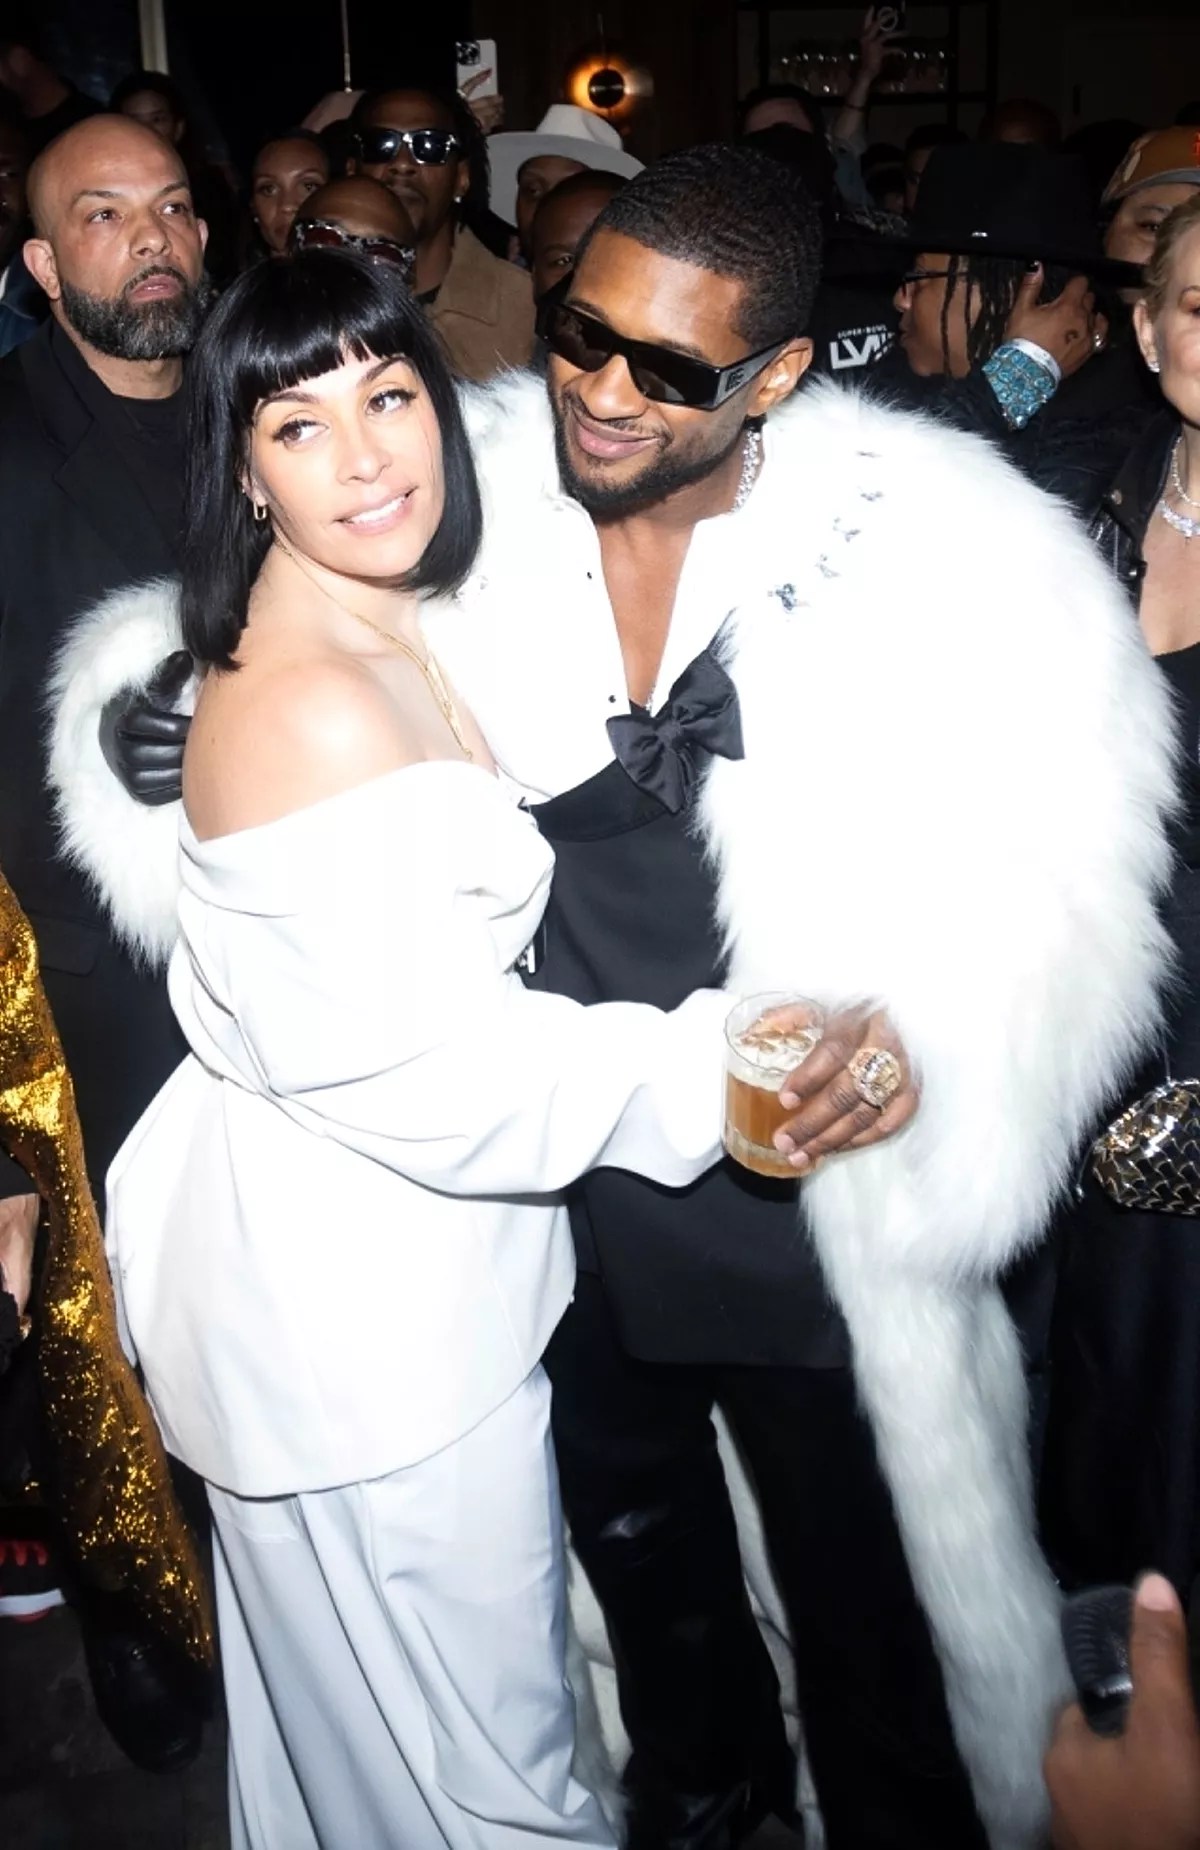 Usher and his new bride, Jennifer Goicoechea, make a stunning entrance at his private Super Bowl after party, directly following their wedding ceremony.